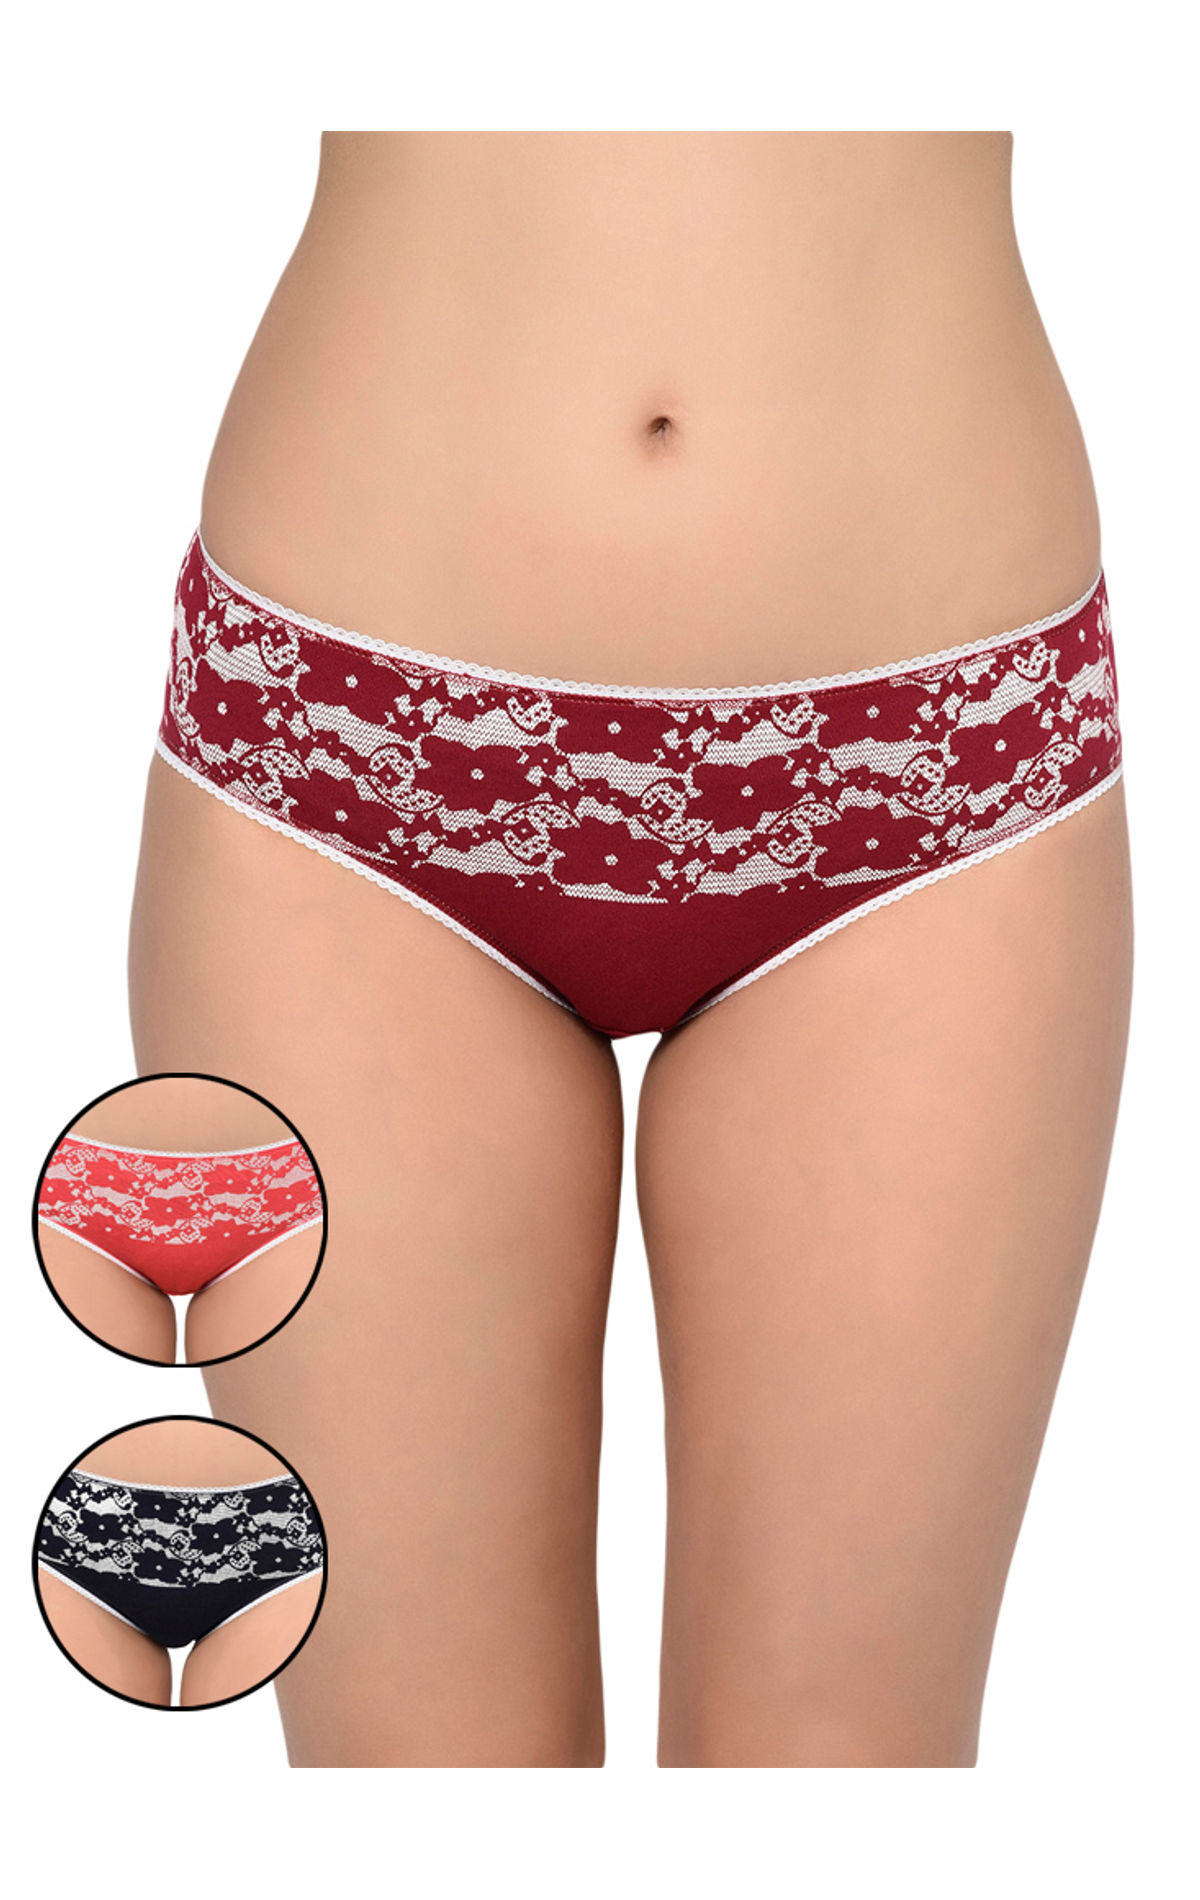 Bodycare Pack Of 3 Printed Panty In Assorted Colors95193pcs 9519